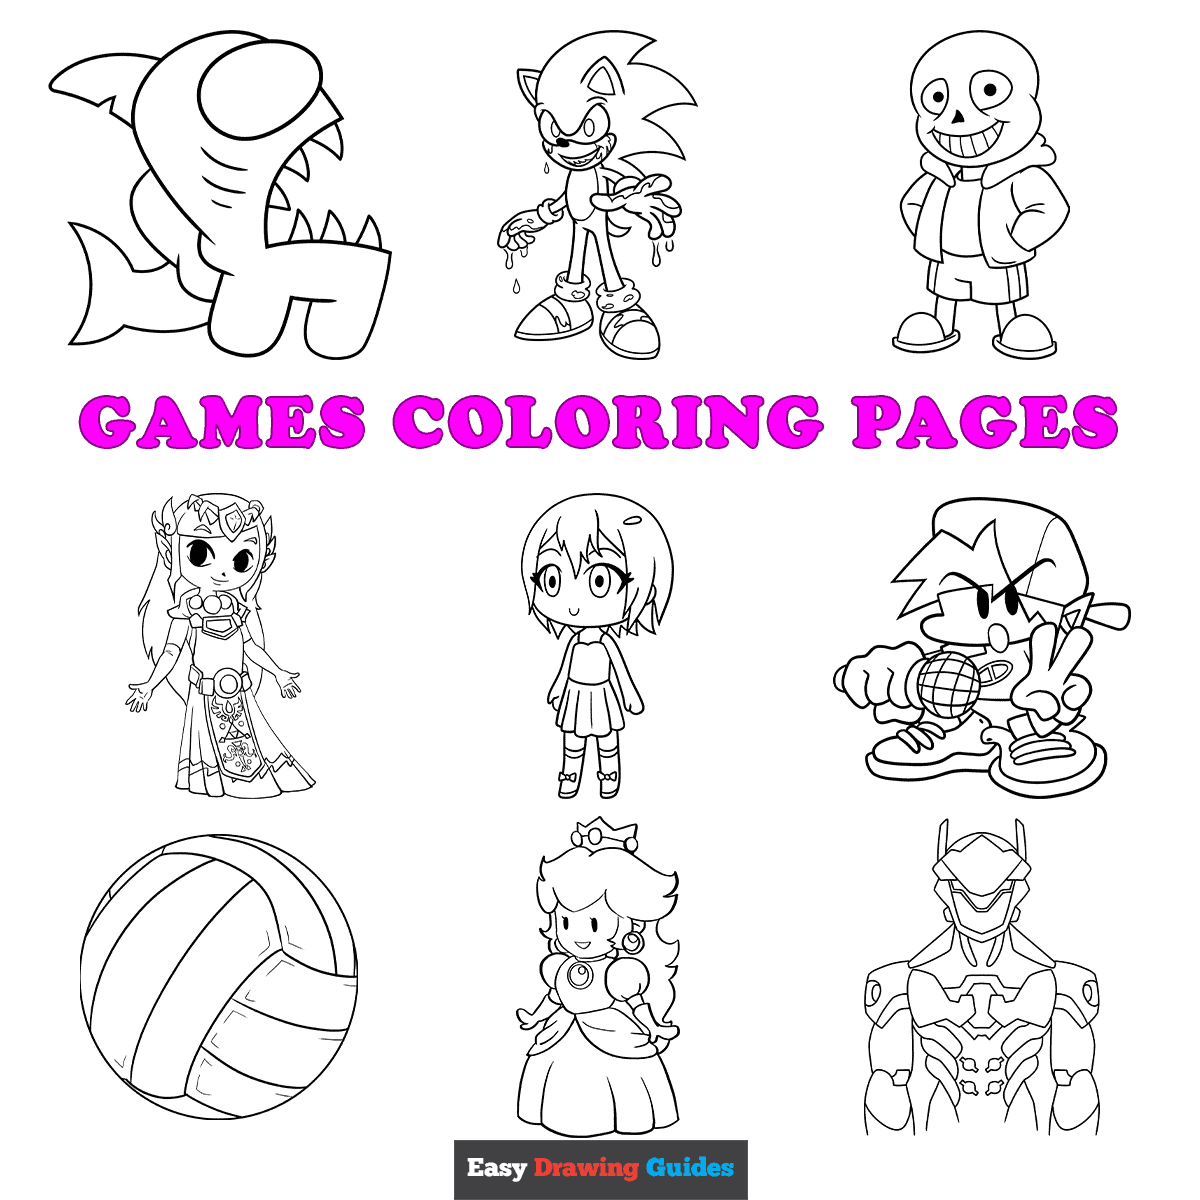 Free printable games coloring pages for kids